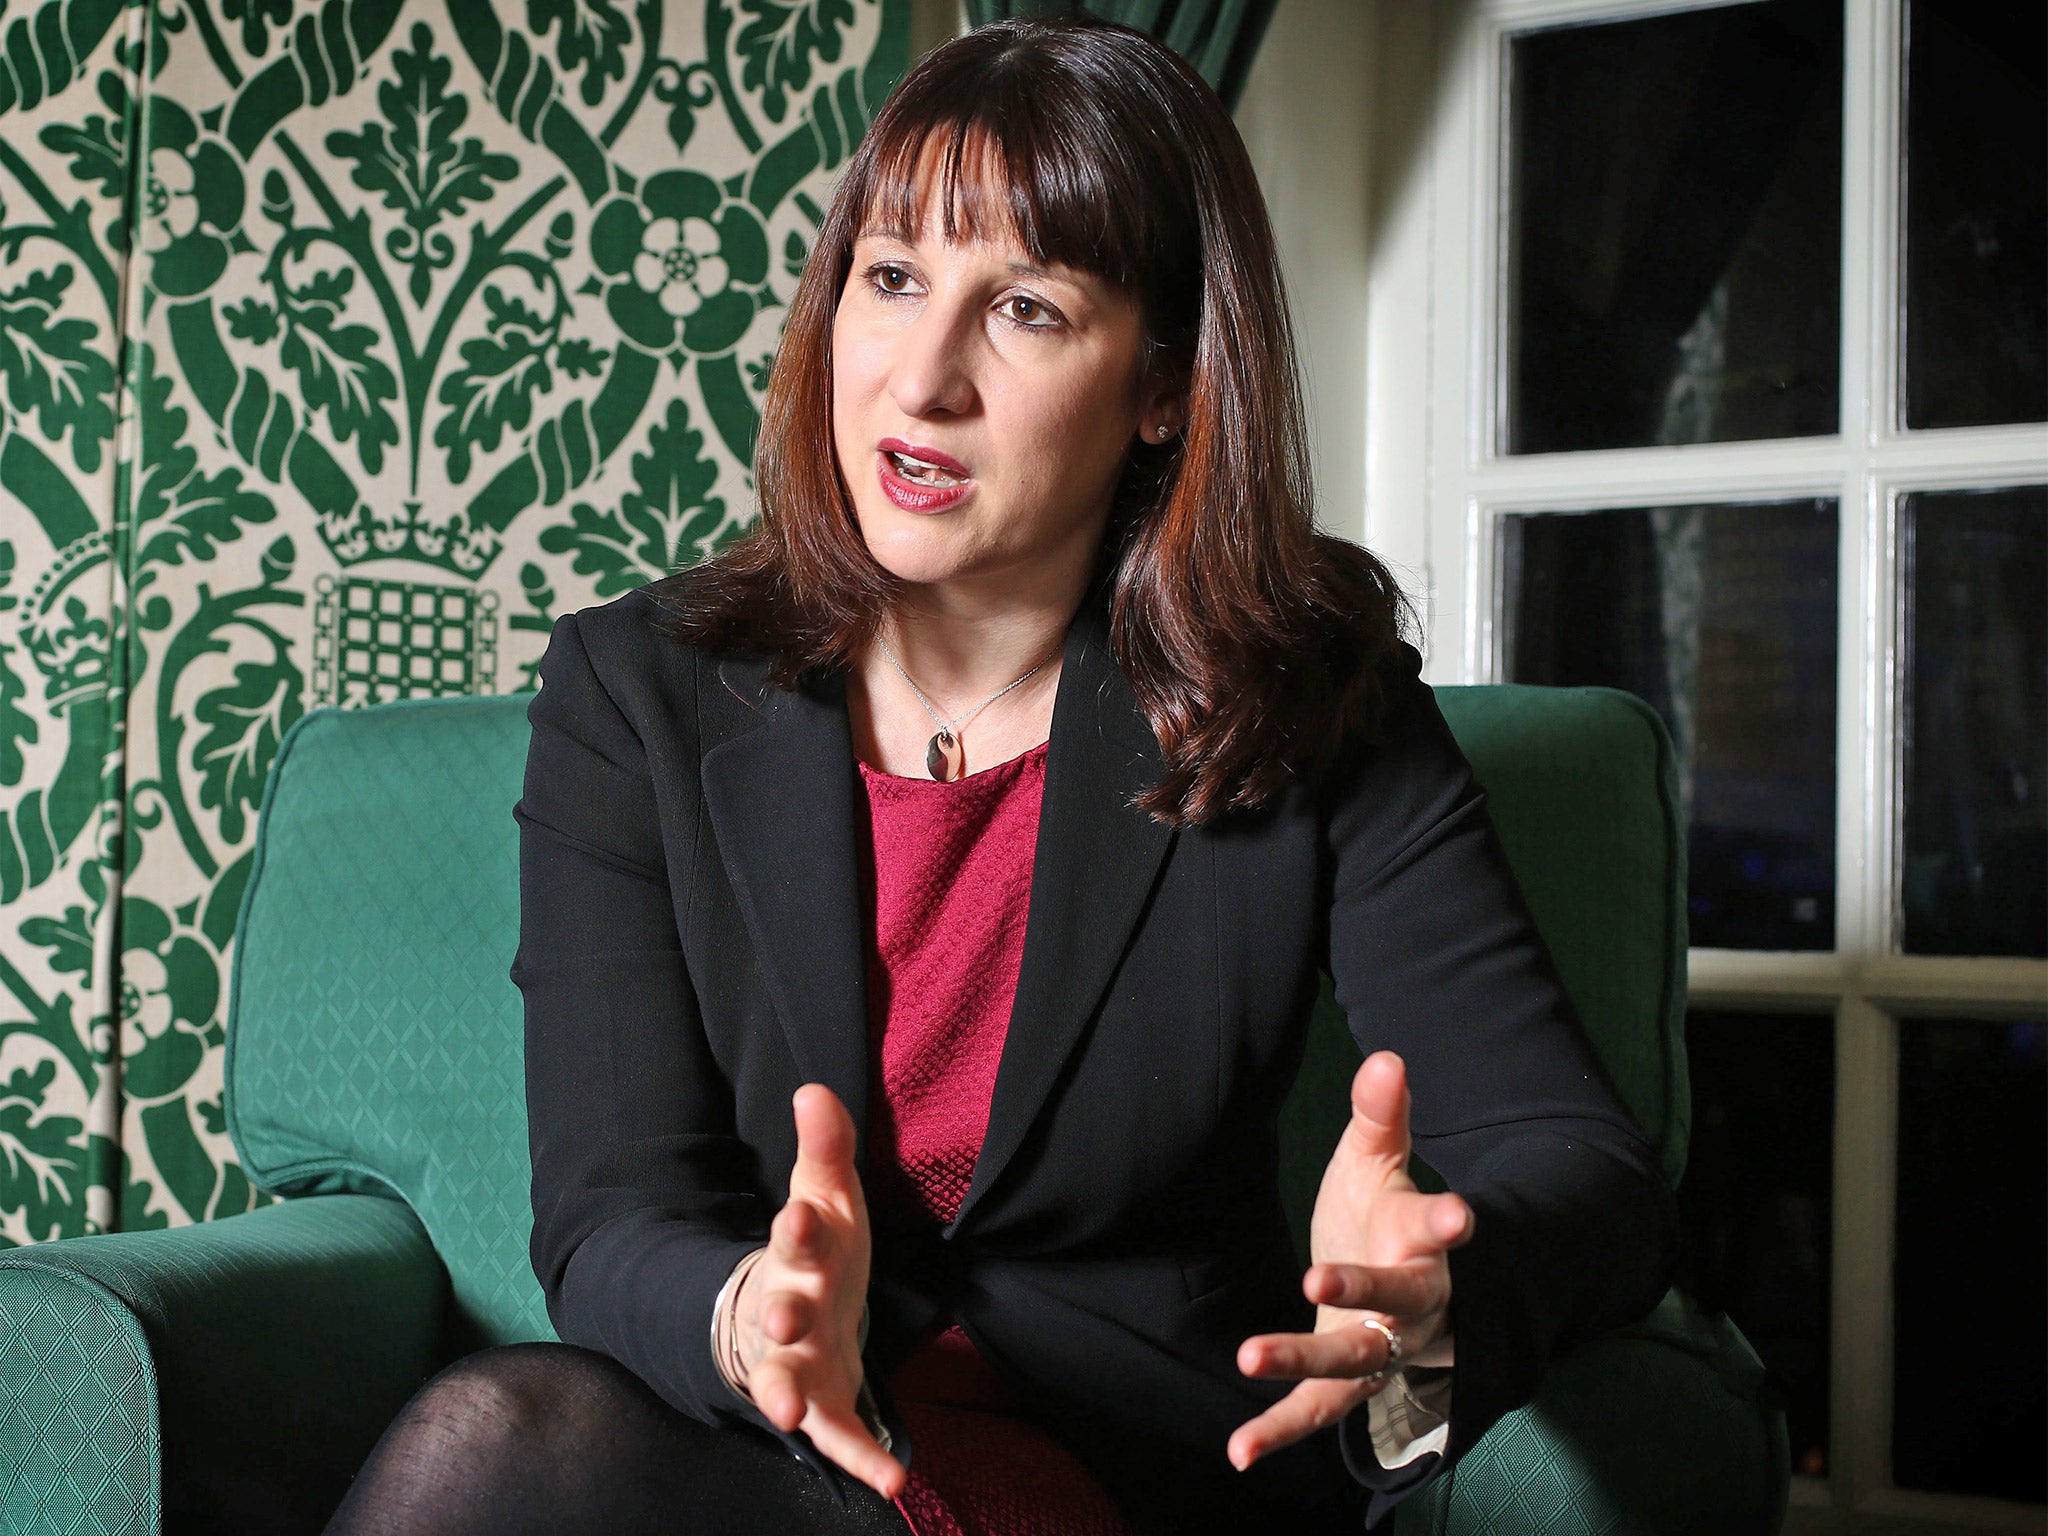 Rachel Reeves, Shadow Minister for Work and Pensions